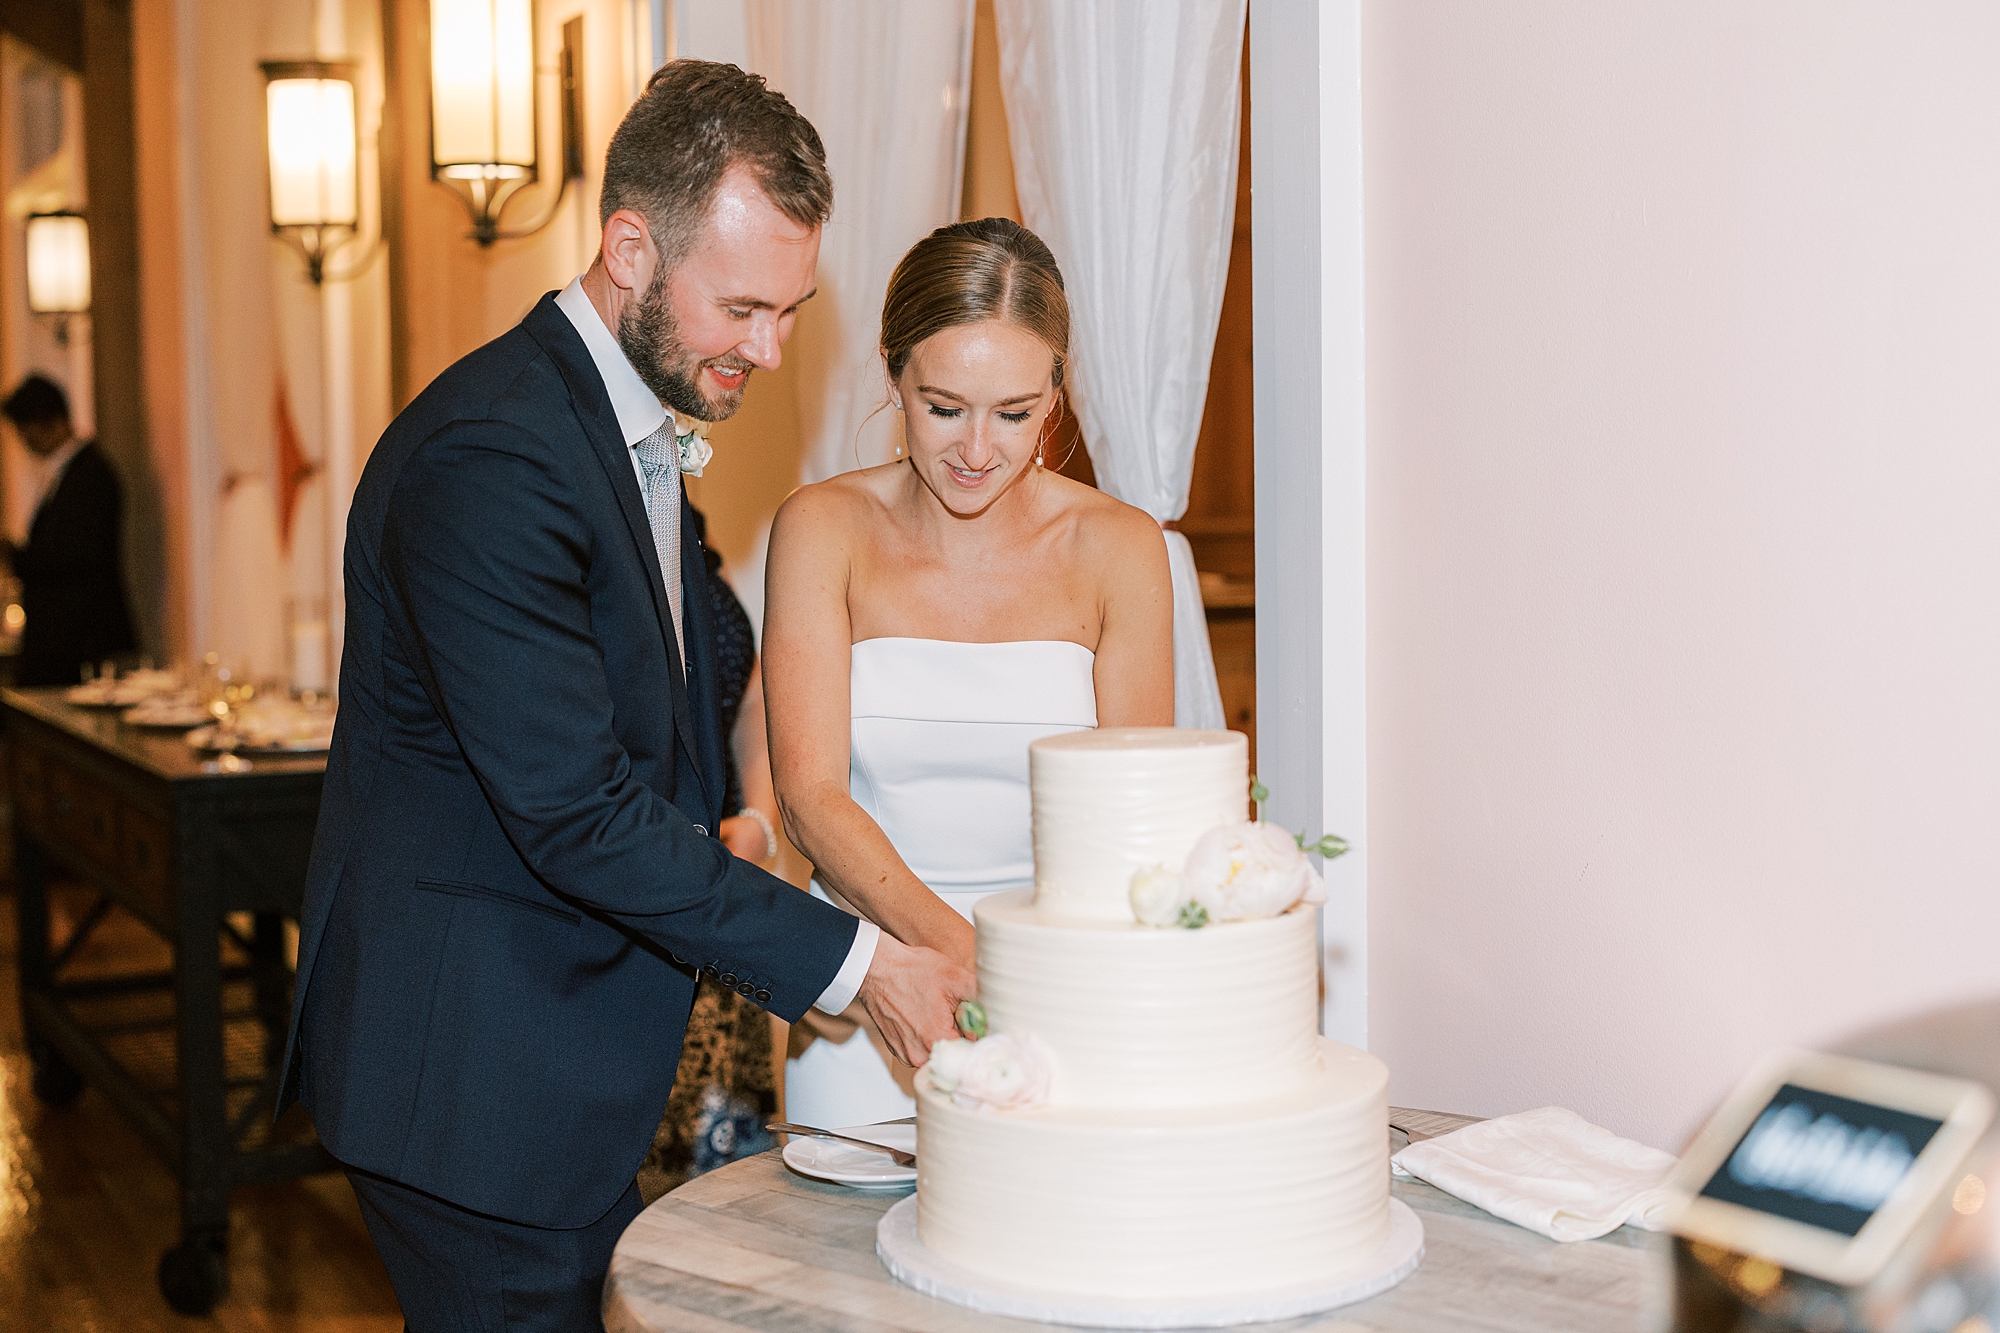 bride and groom cut wedding cake together during Willow Creek Winery wedding reception